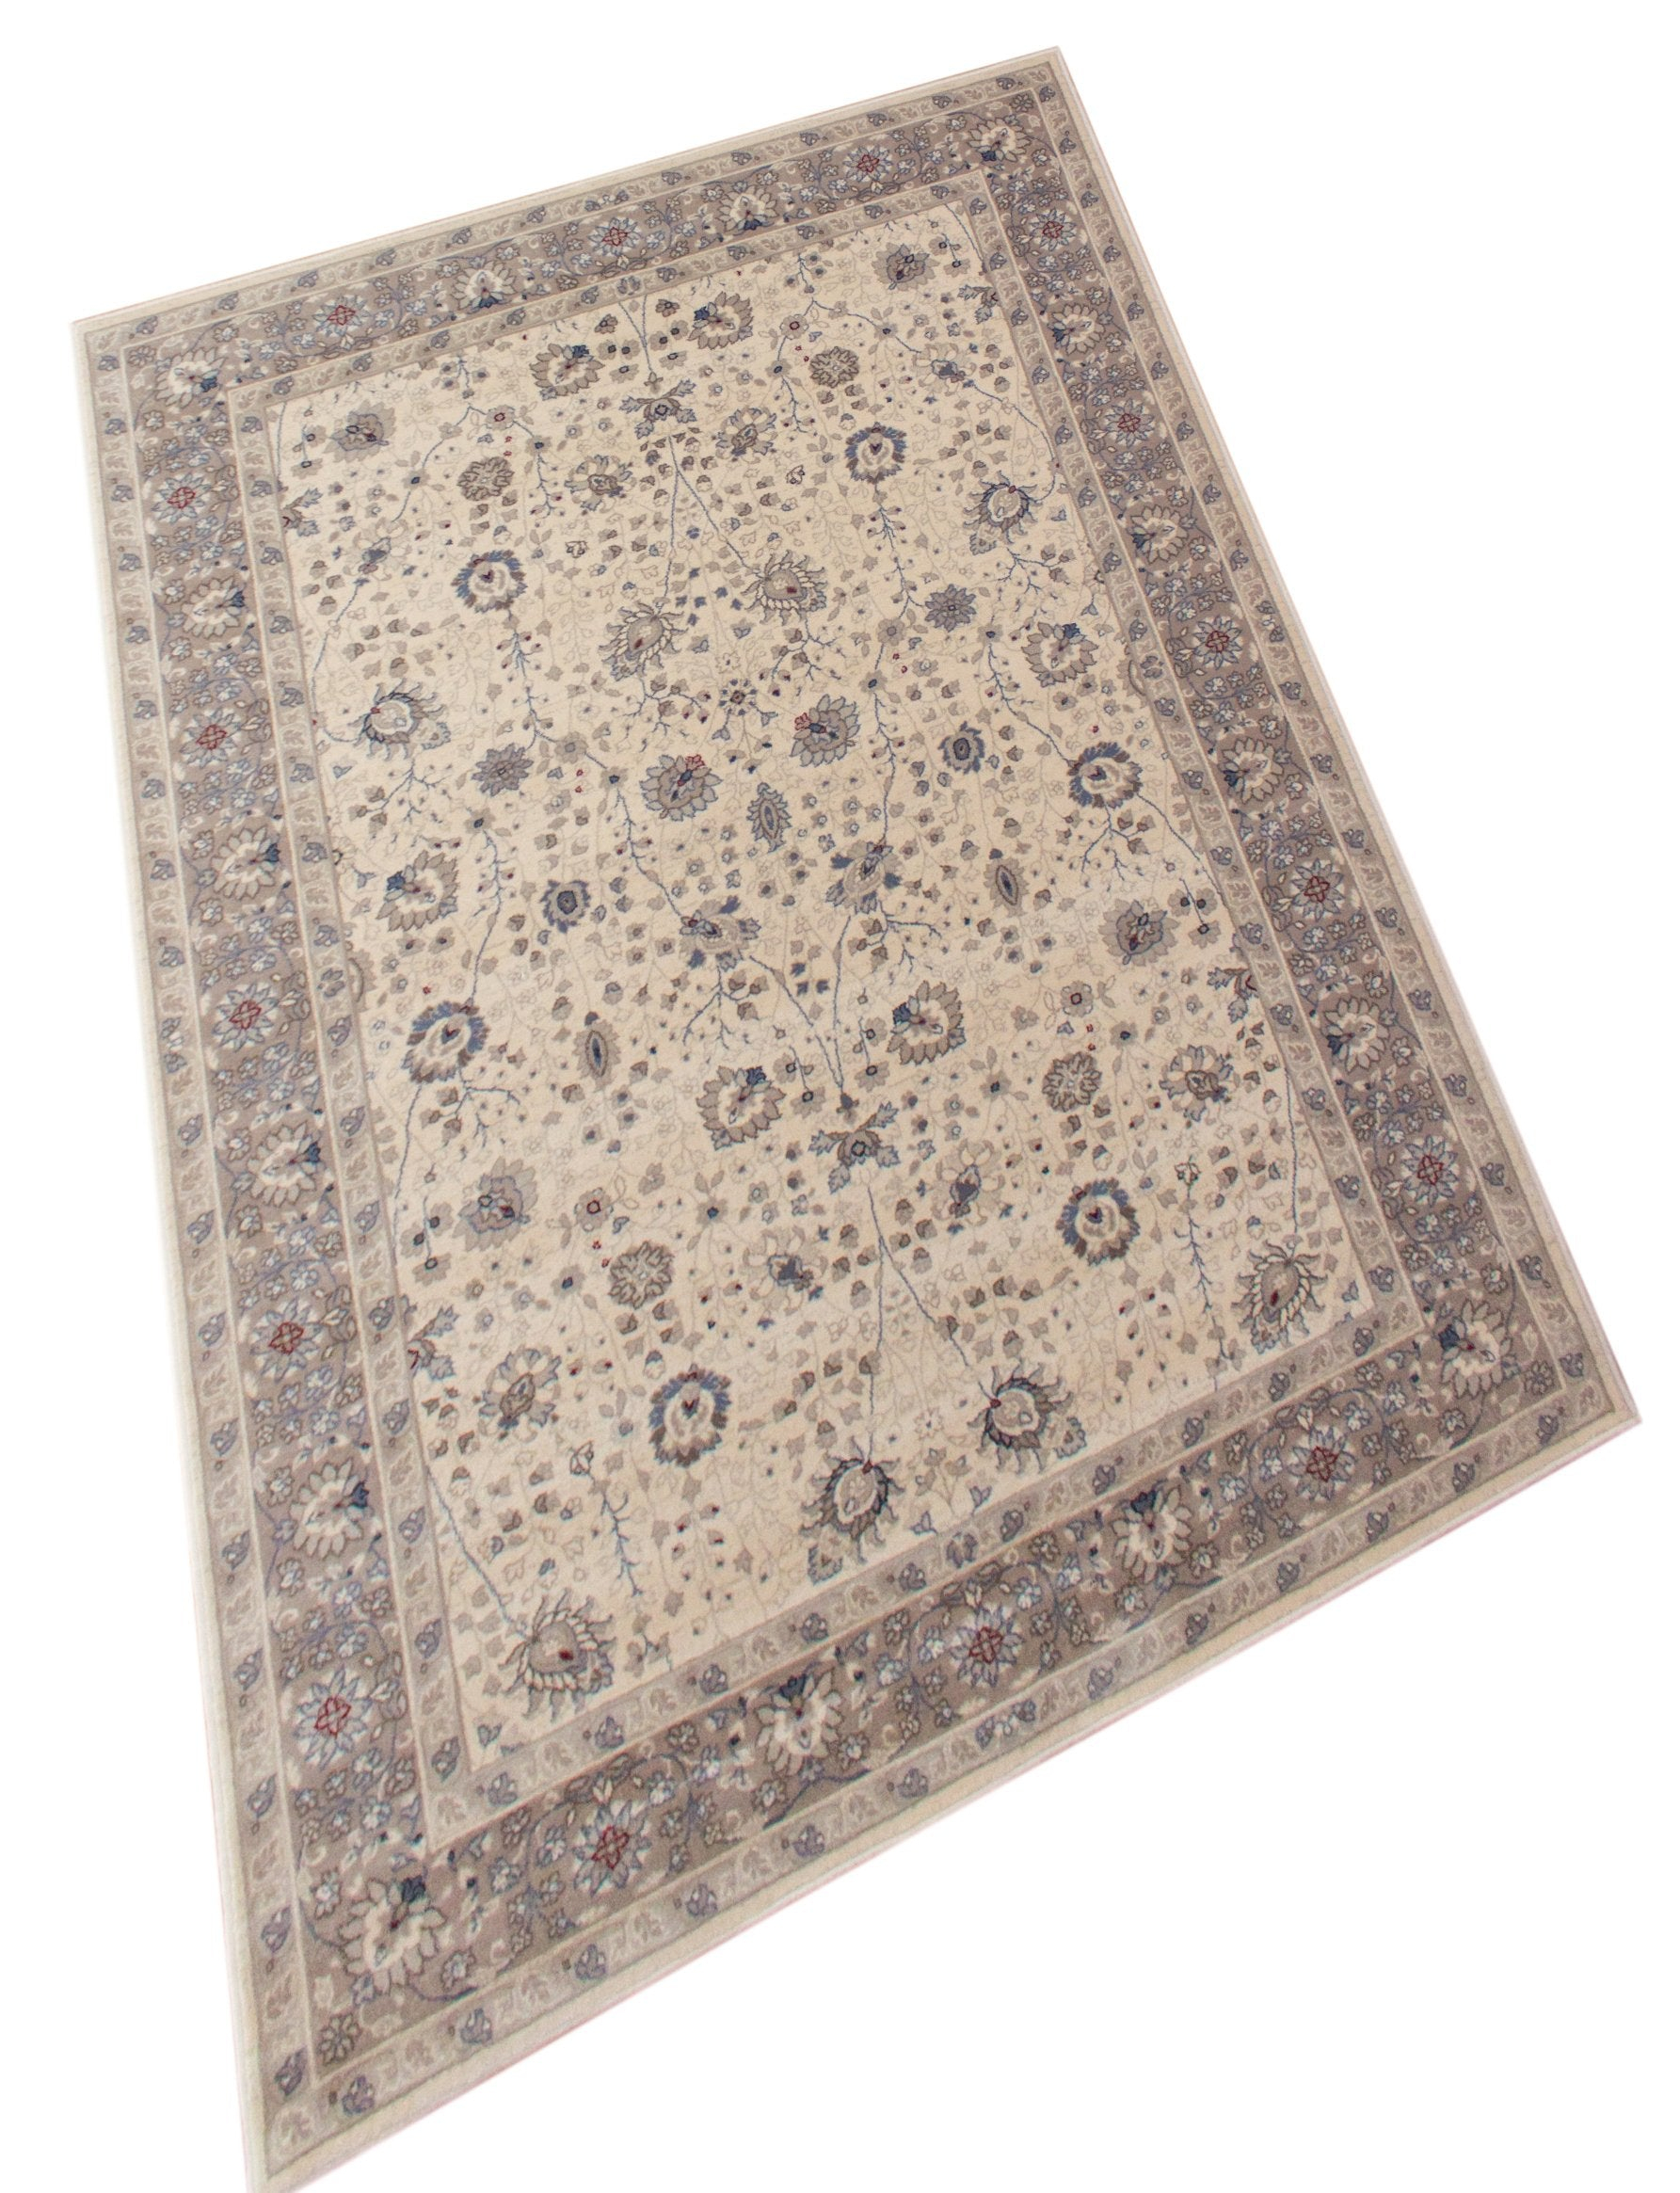 Oriental Woven Rug-Area rug for living room, dining area, and bedroom